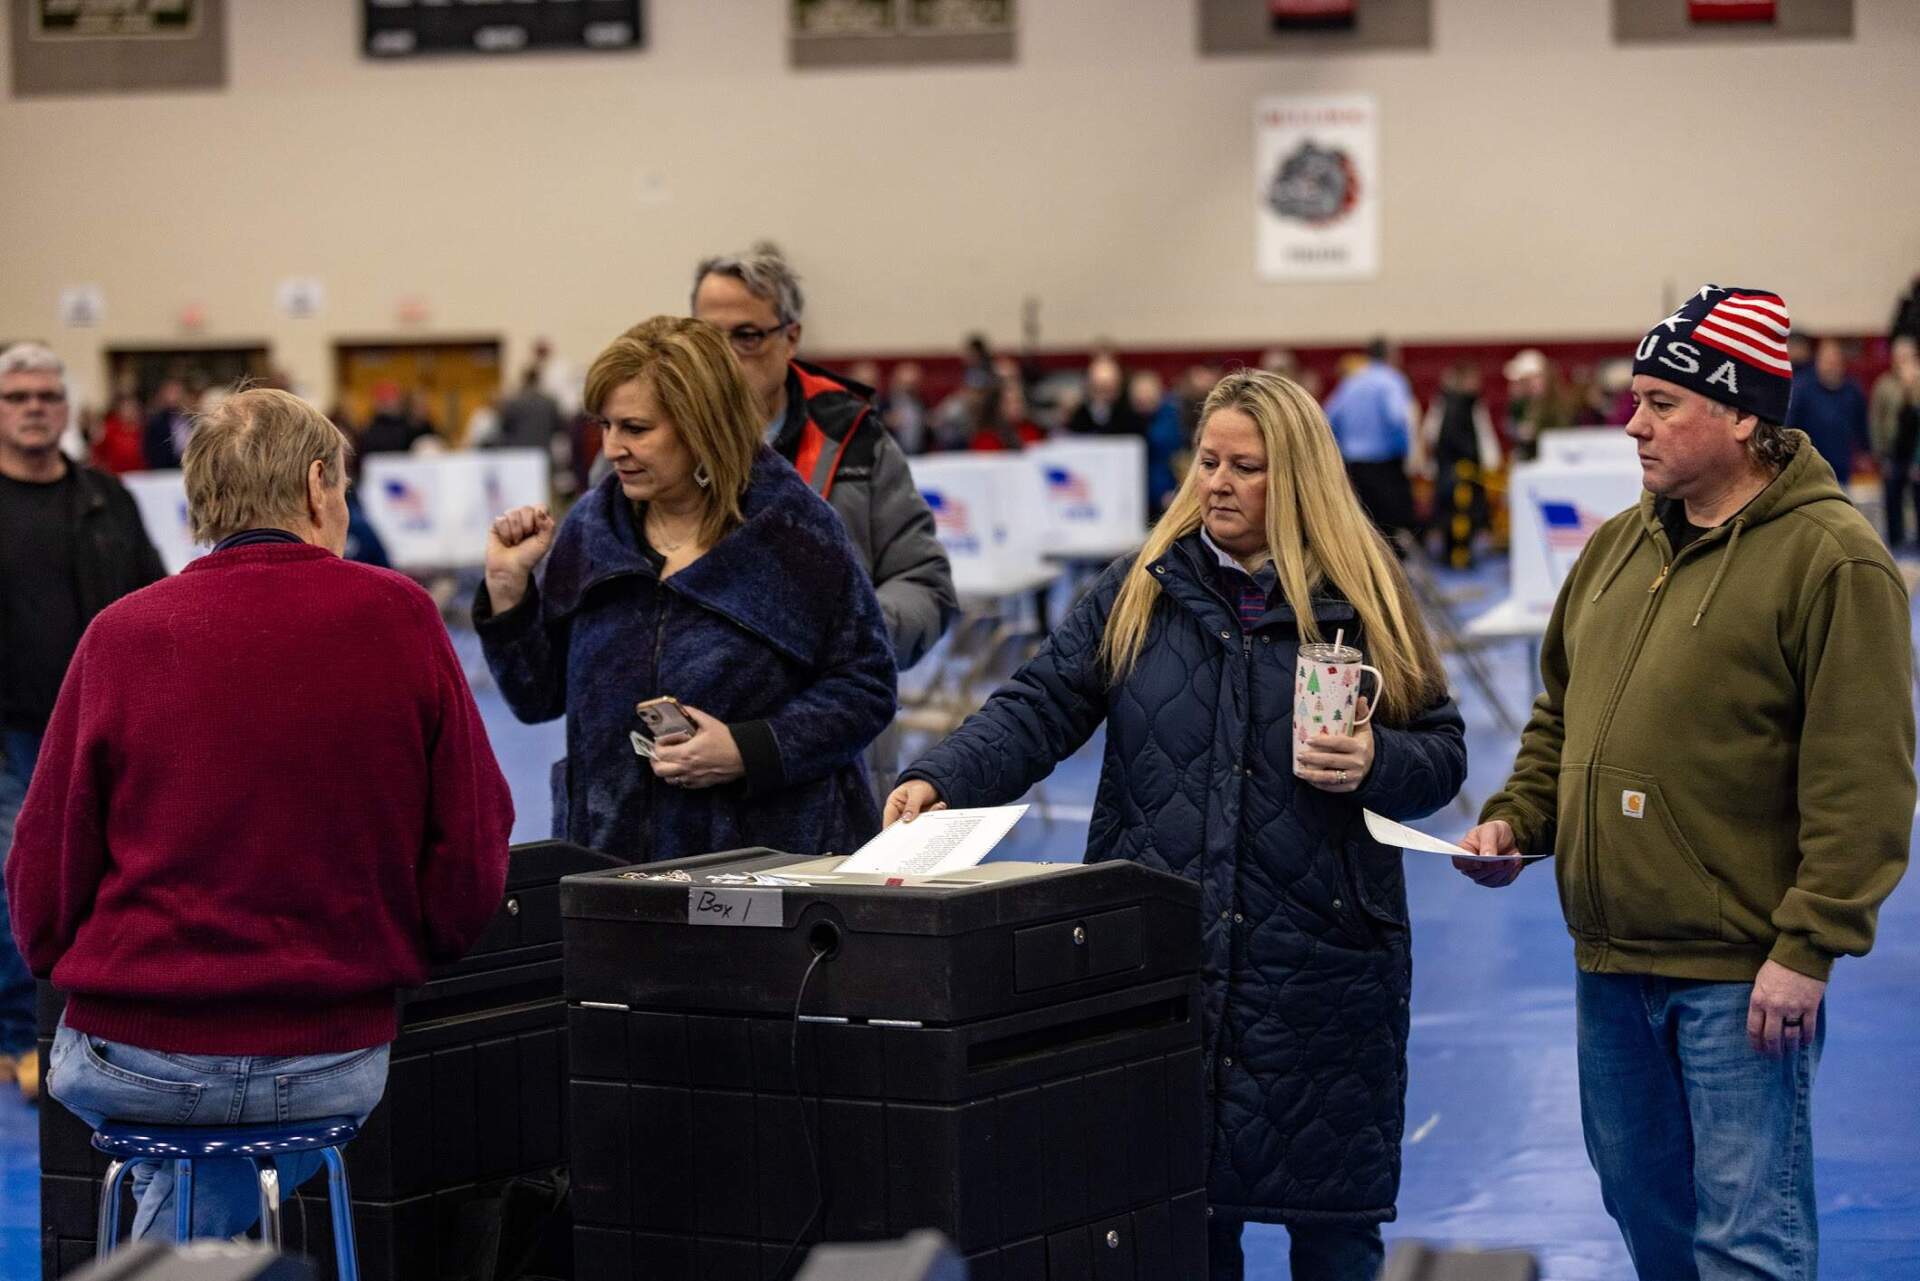 Voters at Bedford High School cast their ballots in the New Hampshire Primary. (Jesse Costa/WBUR)